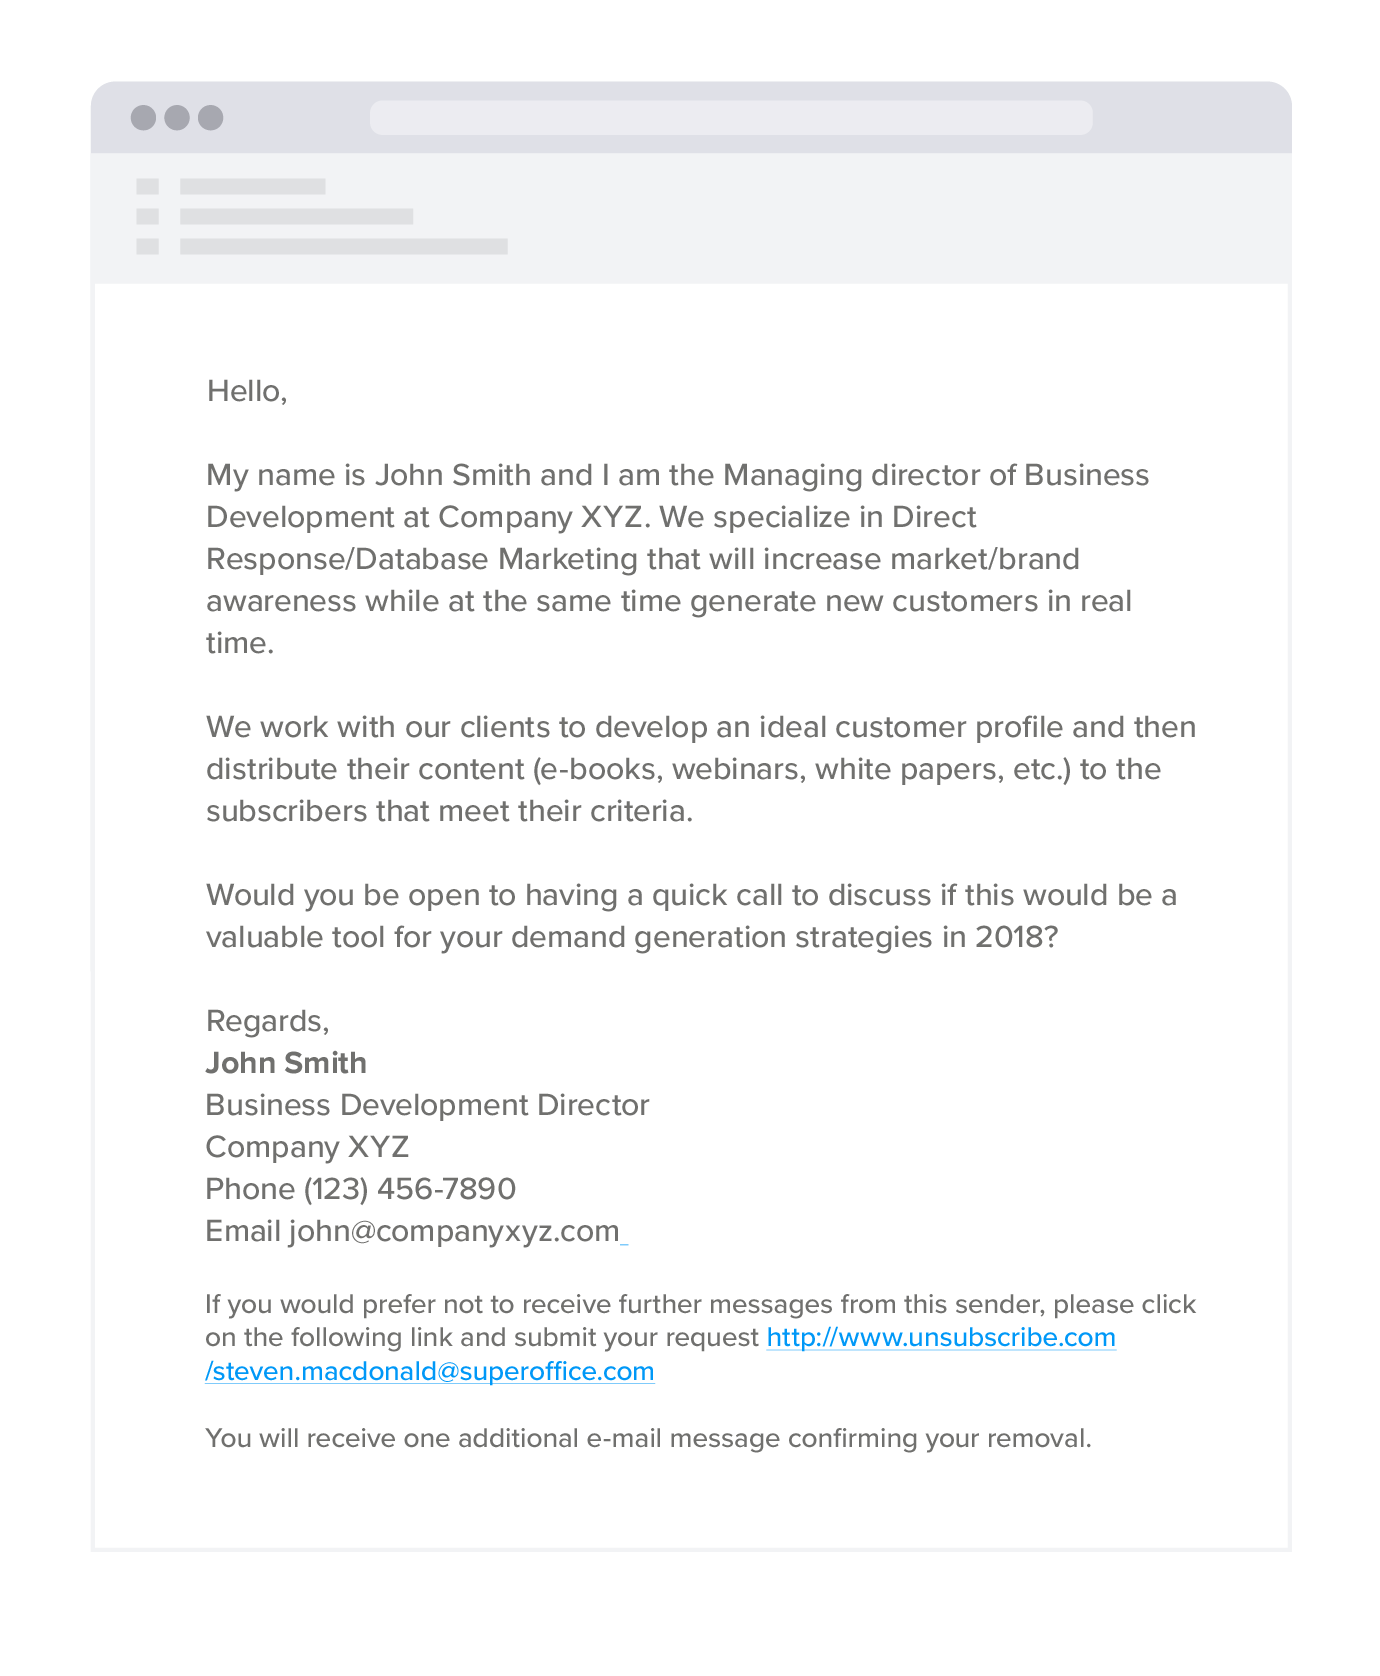 Cold sales email example